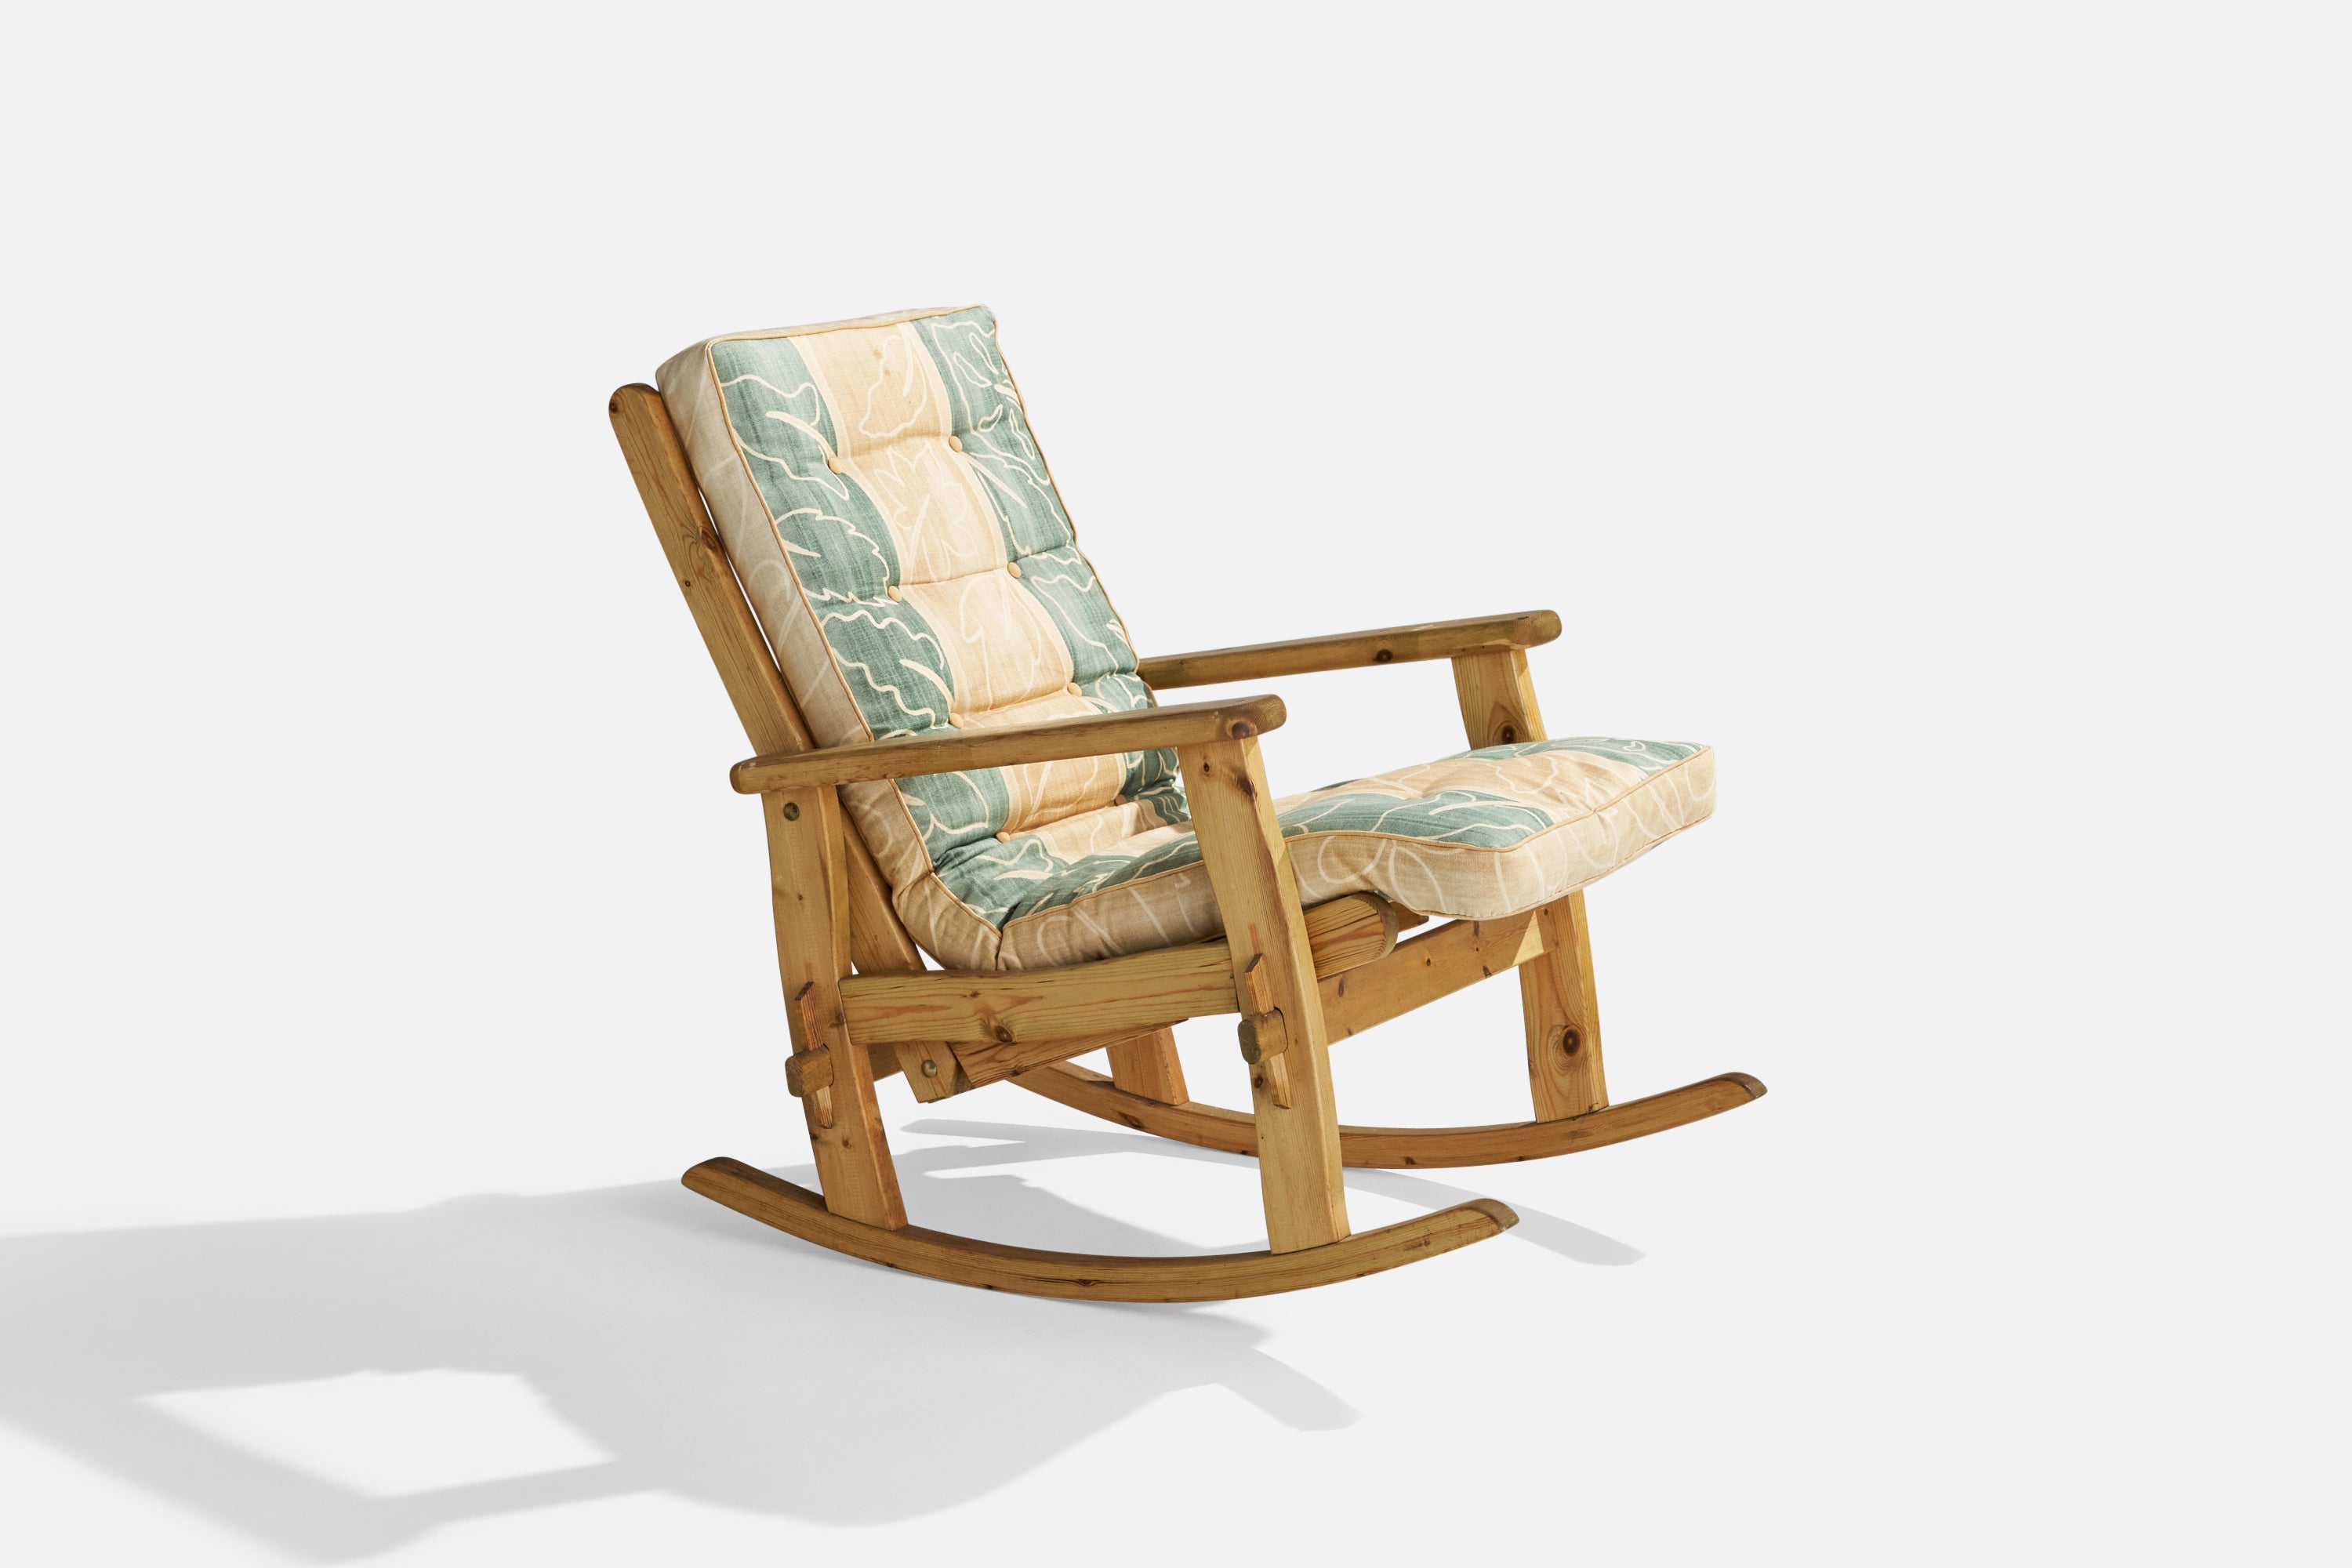 A pine and fabric lounge chair designed and produced by Harbo Fritid, Sweden, c. 1980s.

Seat height 19”.